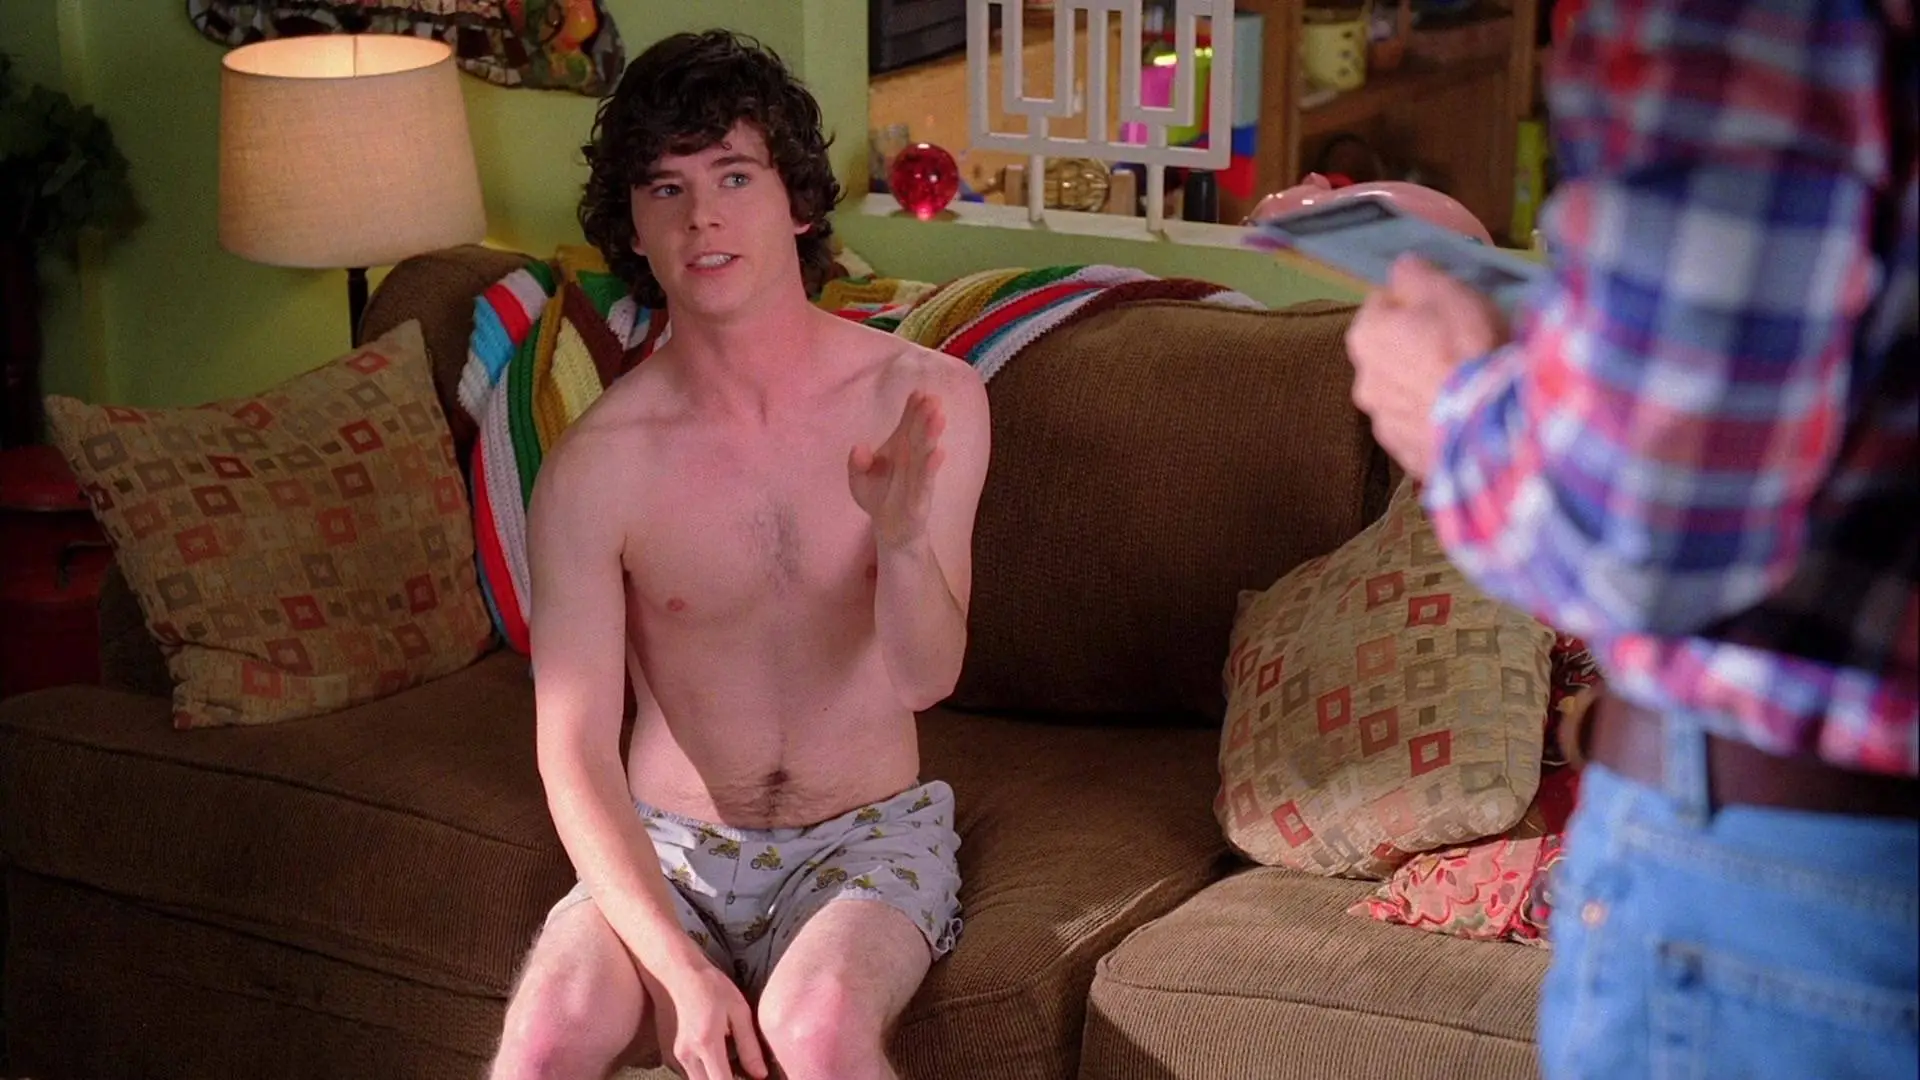 Charlie mcdermott feet - 🧡 The Stars Come Out To Play: Charlie McDermott -...